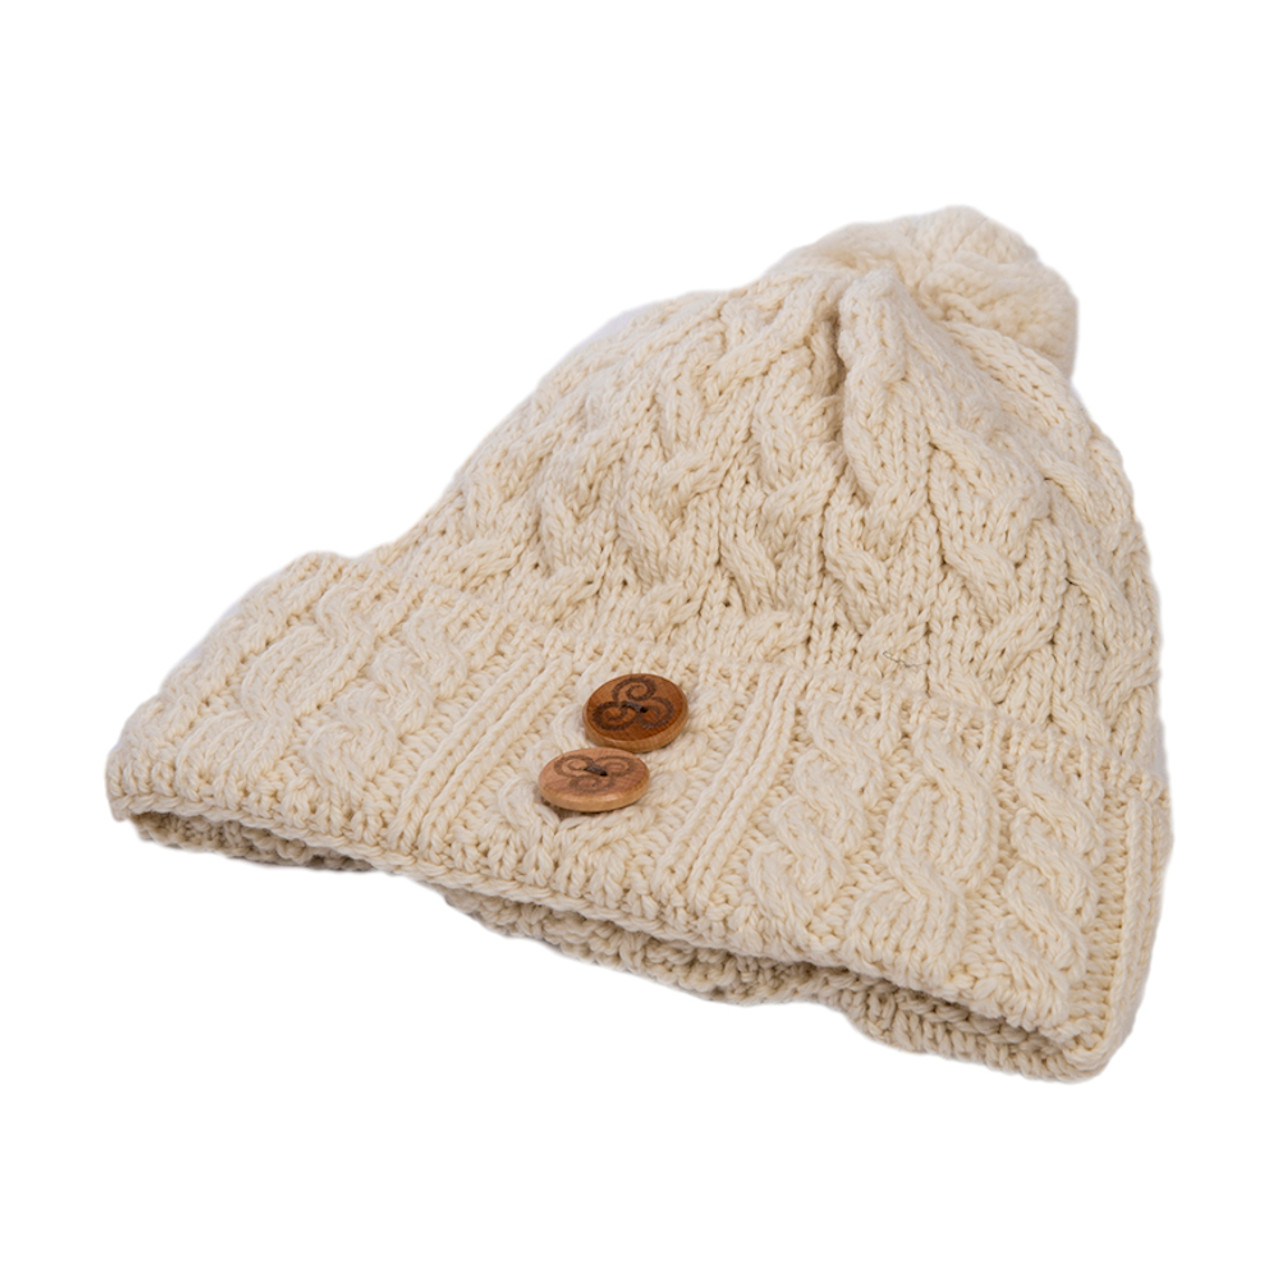 Aran Woollen Mills Cream Cable Knitted Bobble Hat